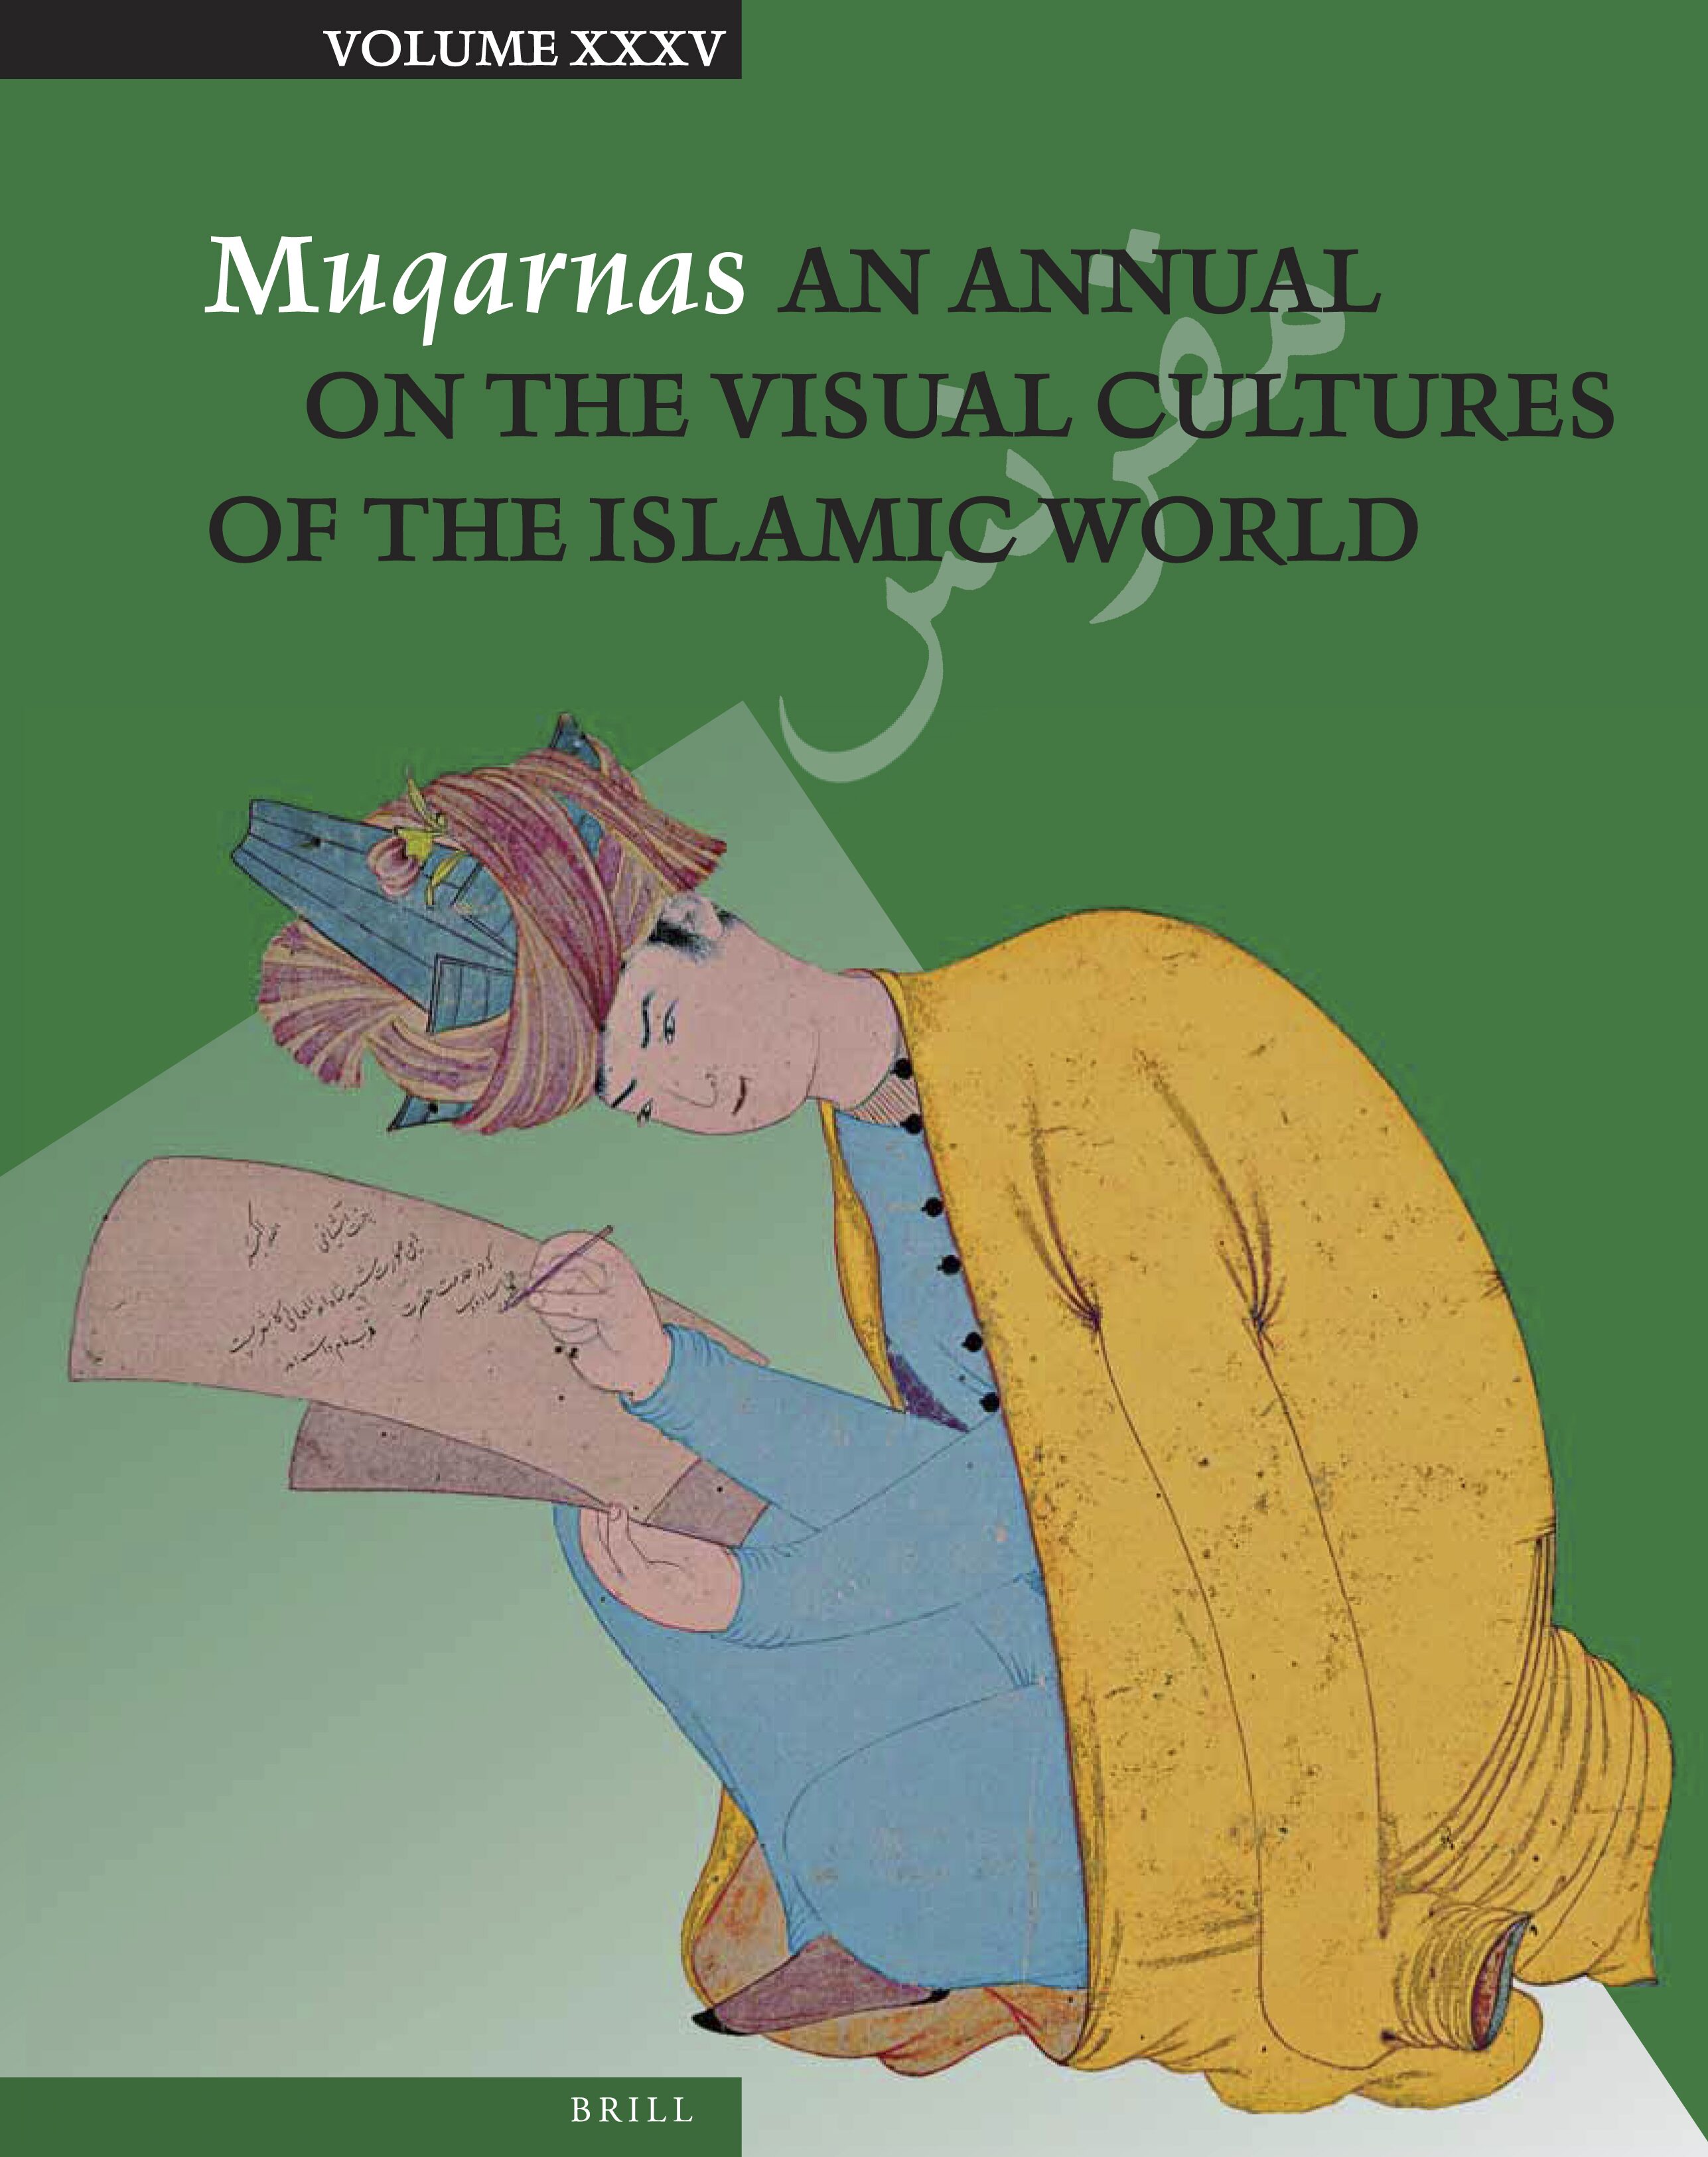 Muqarnas XXXV: An Annual on the Visual Cultures of the Islamic World